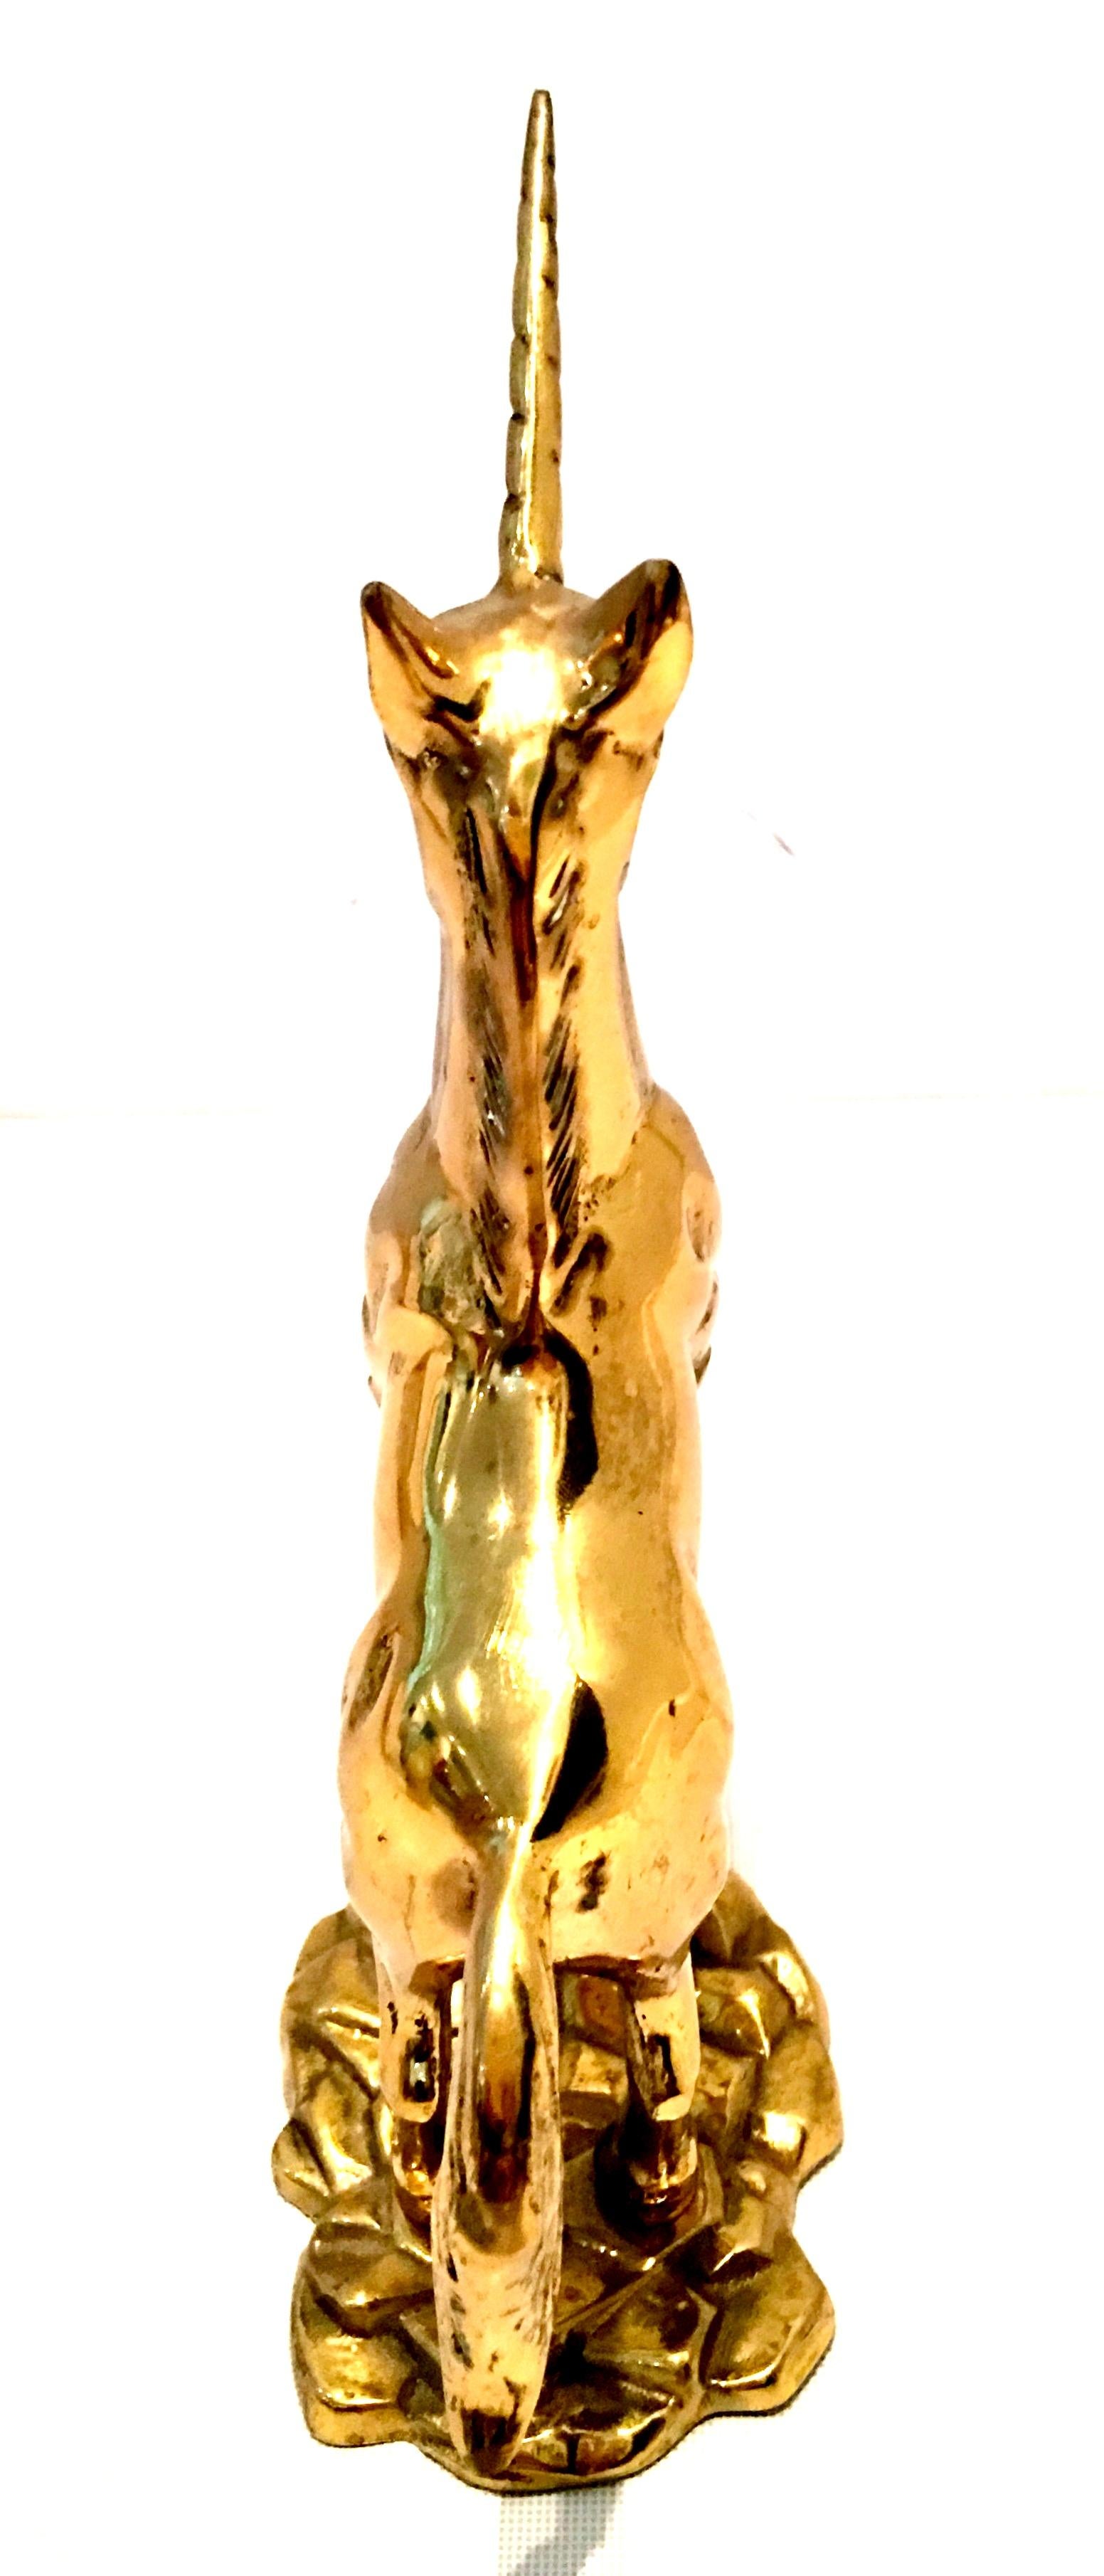 Mid 20th-Century Solid Brass Unicorn Sculpture In Good Condition For Sale In West Palm Beach, FL